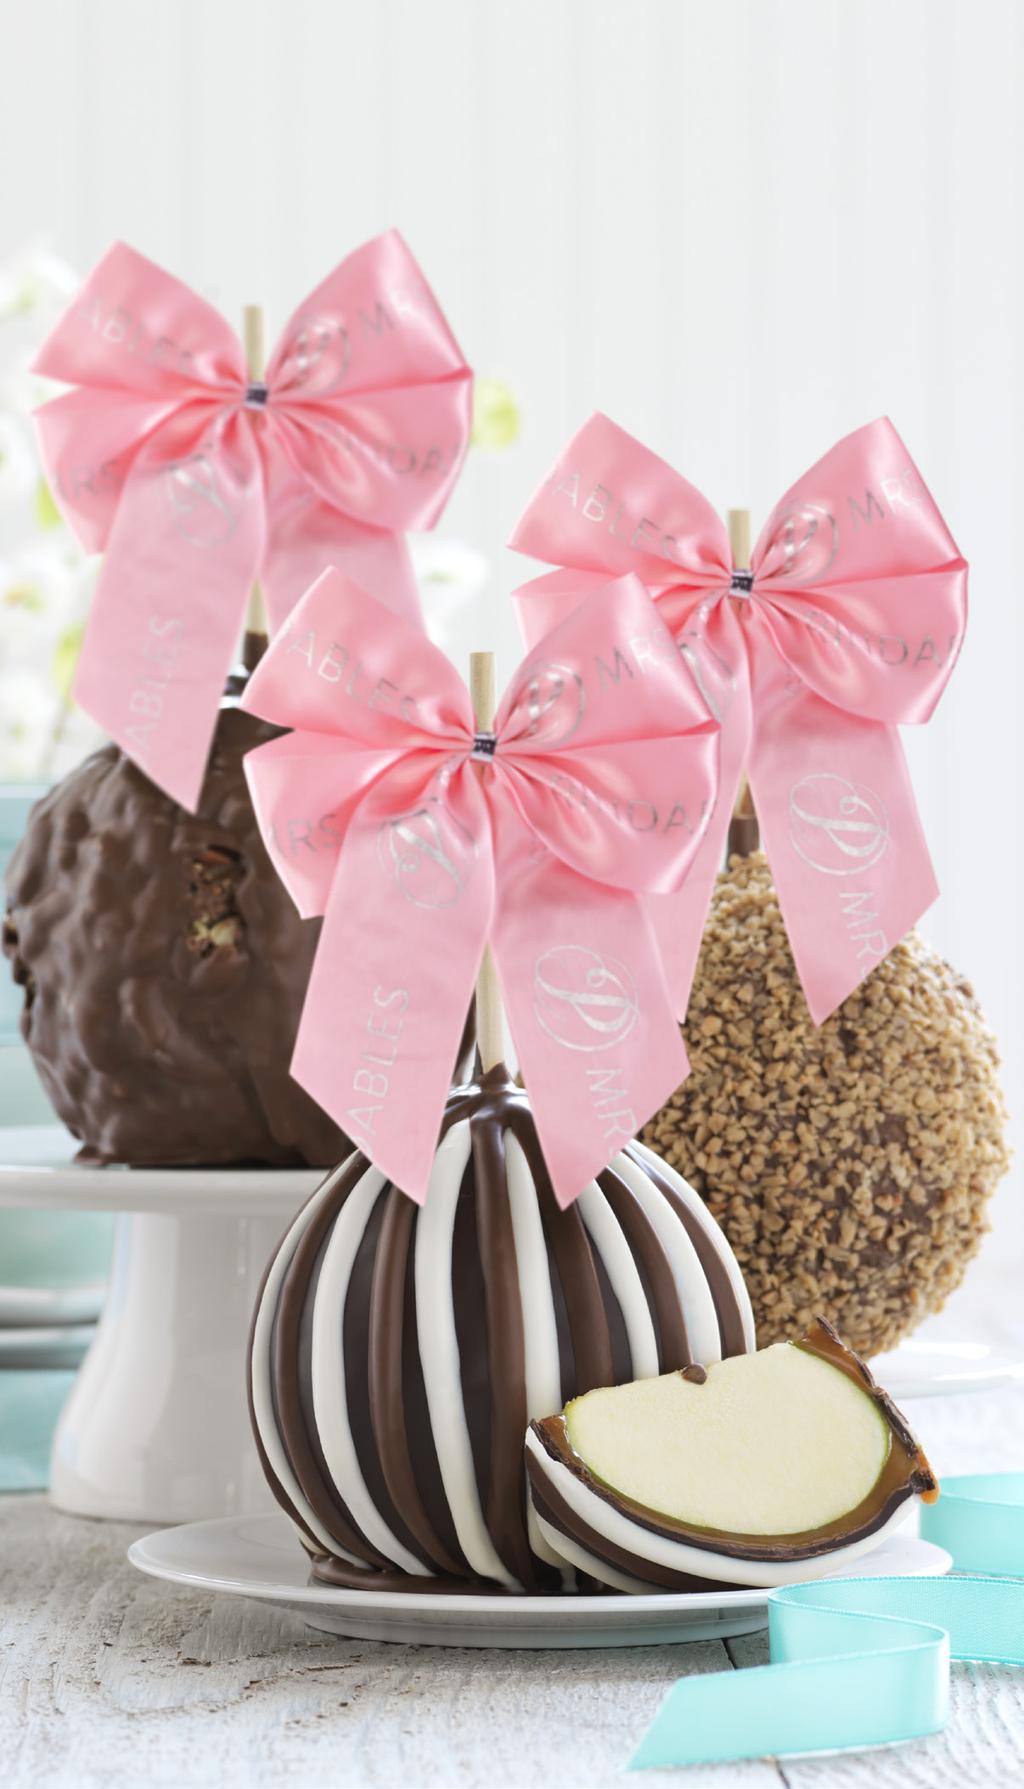 Sweet Spring Jumbo Caramel Apples Our Gourmet Jumbo Caramel Apples are dressed in Spring bows and ready to share.